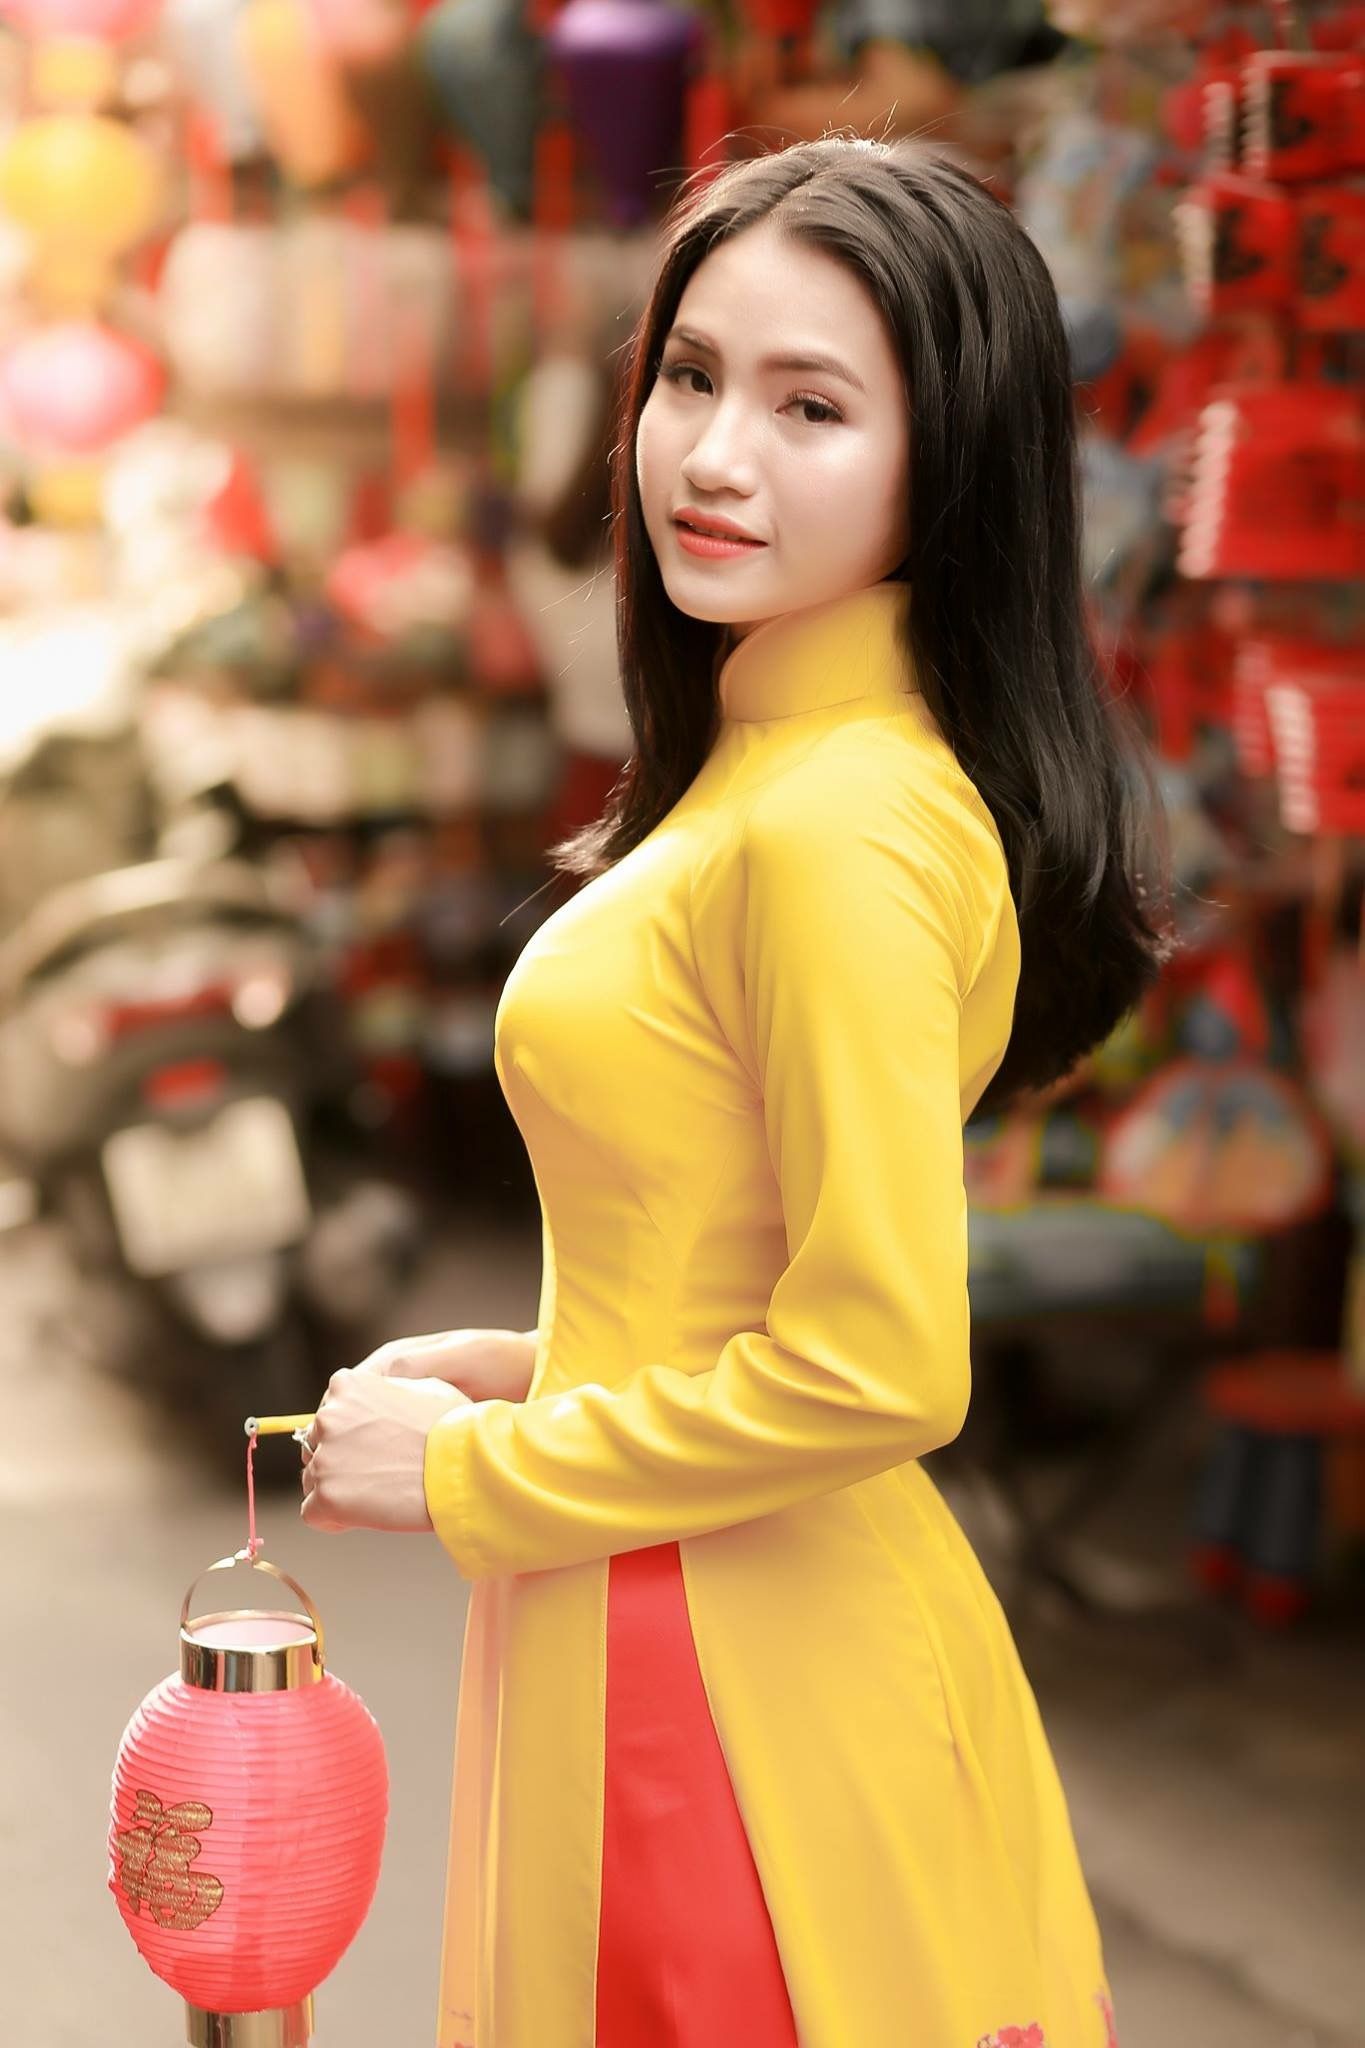 christina hiller recommends ao dai sexy pic